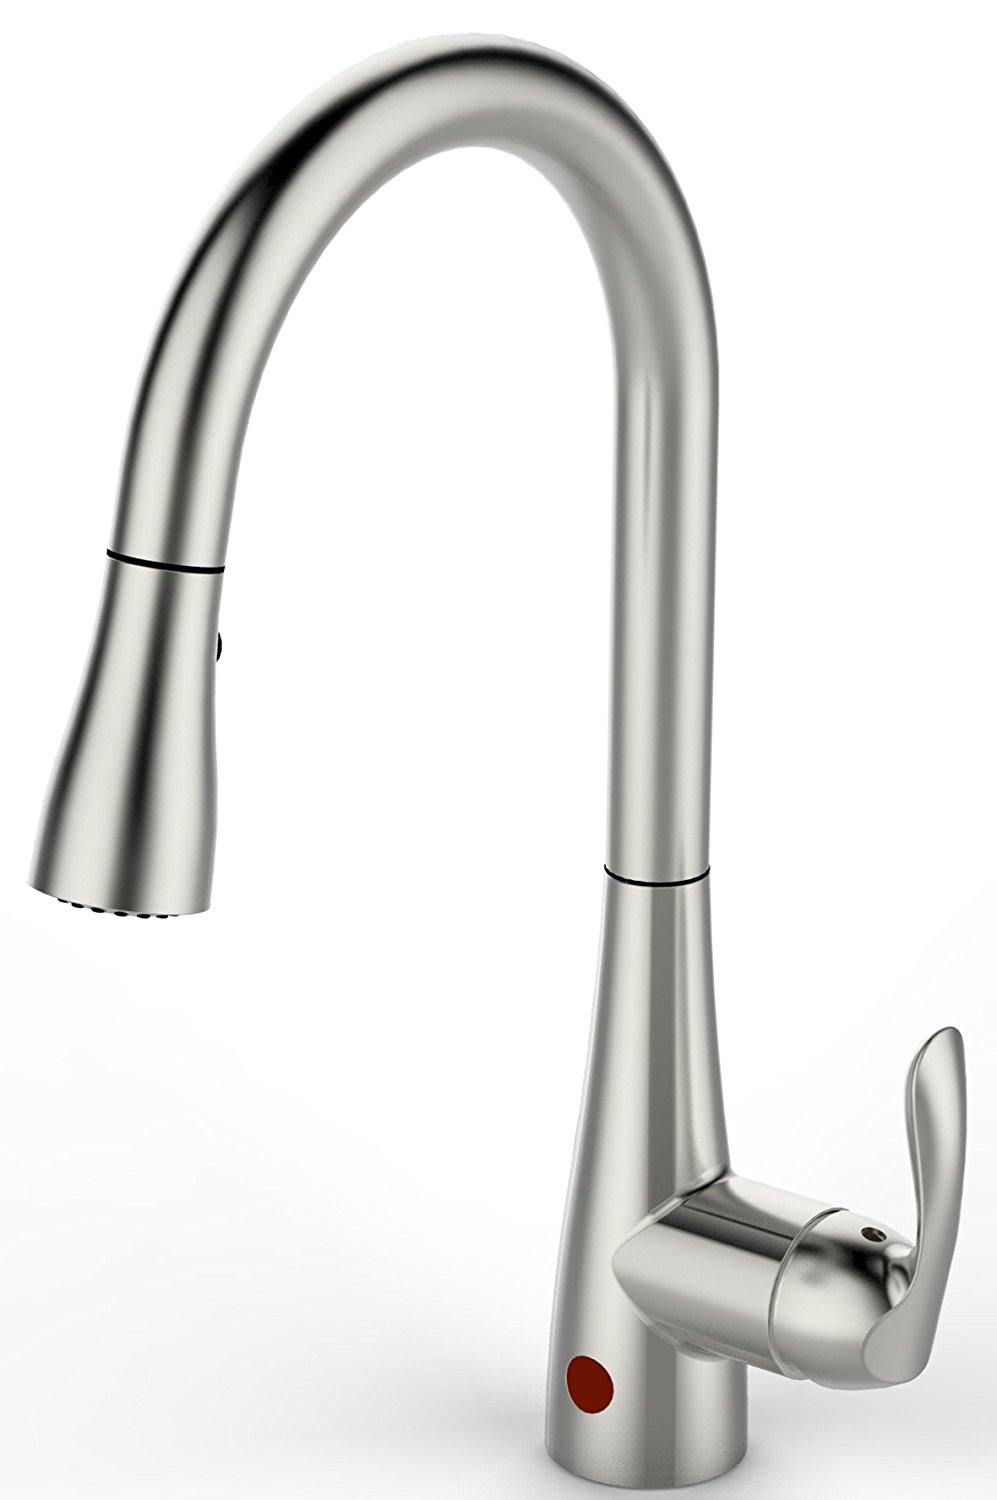 Save on FLOW Faucets by BioBidet! Hands Free Motion Sensing Technology! Just $169.99!